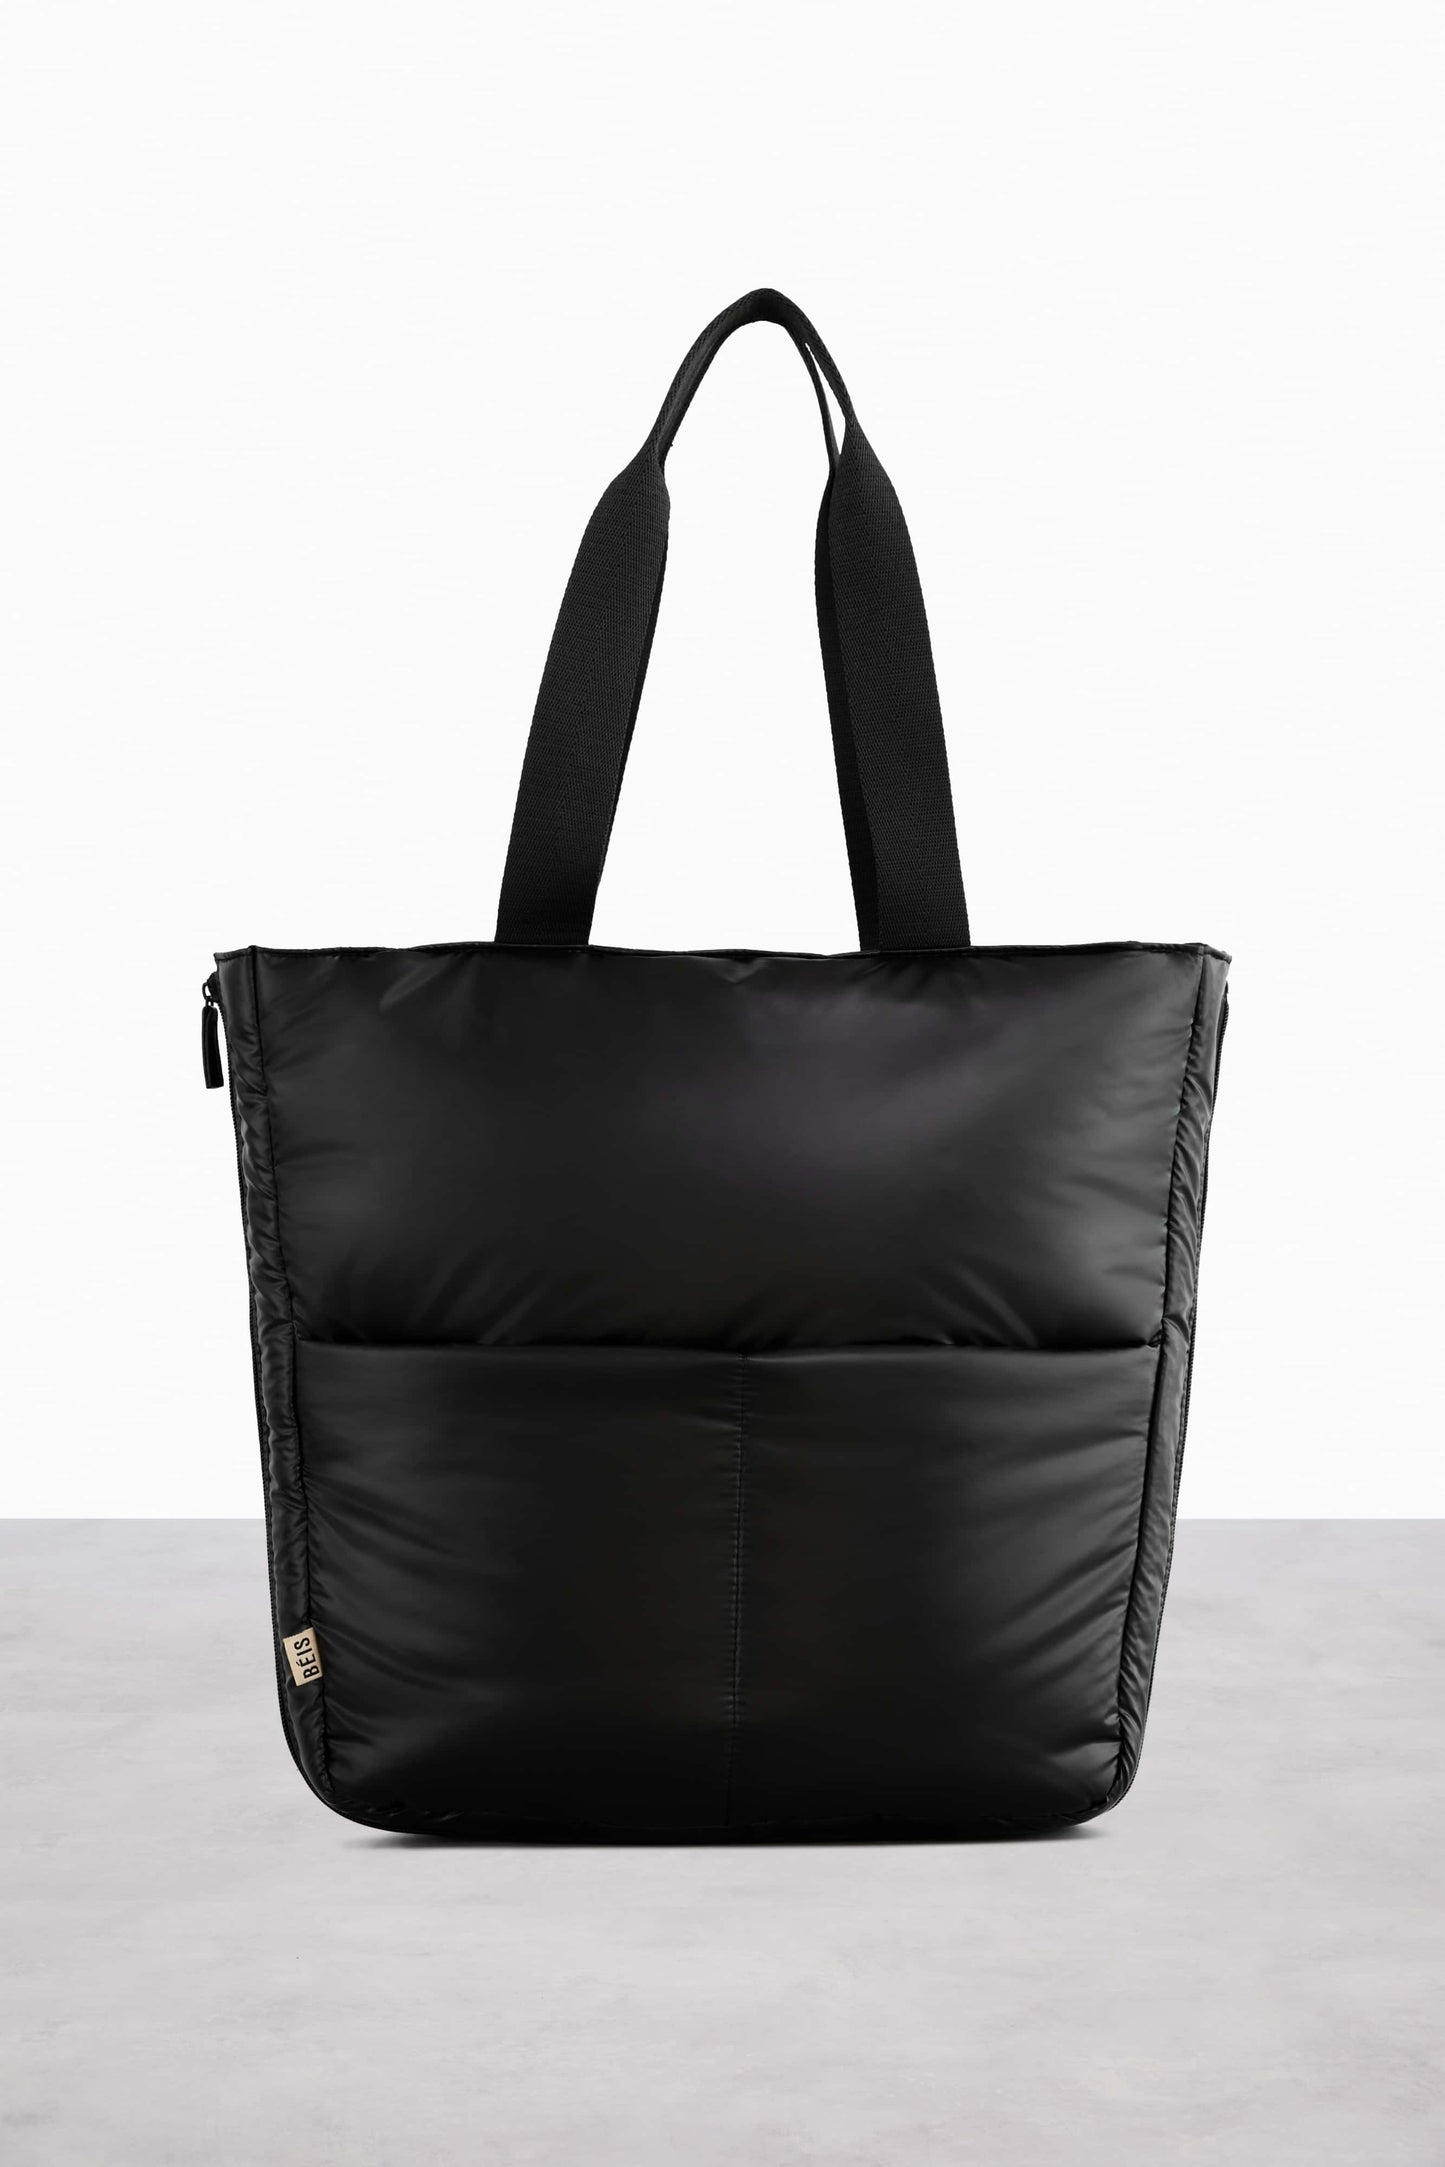 The Expandable Tote in Black